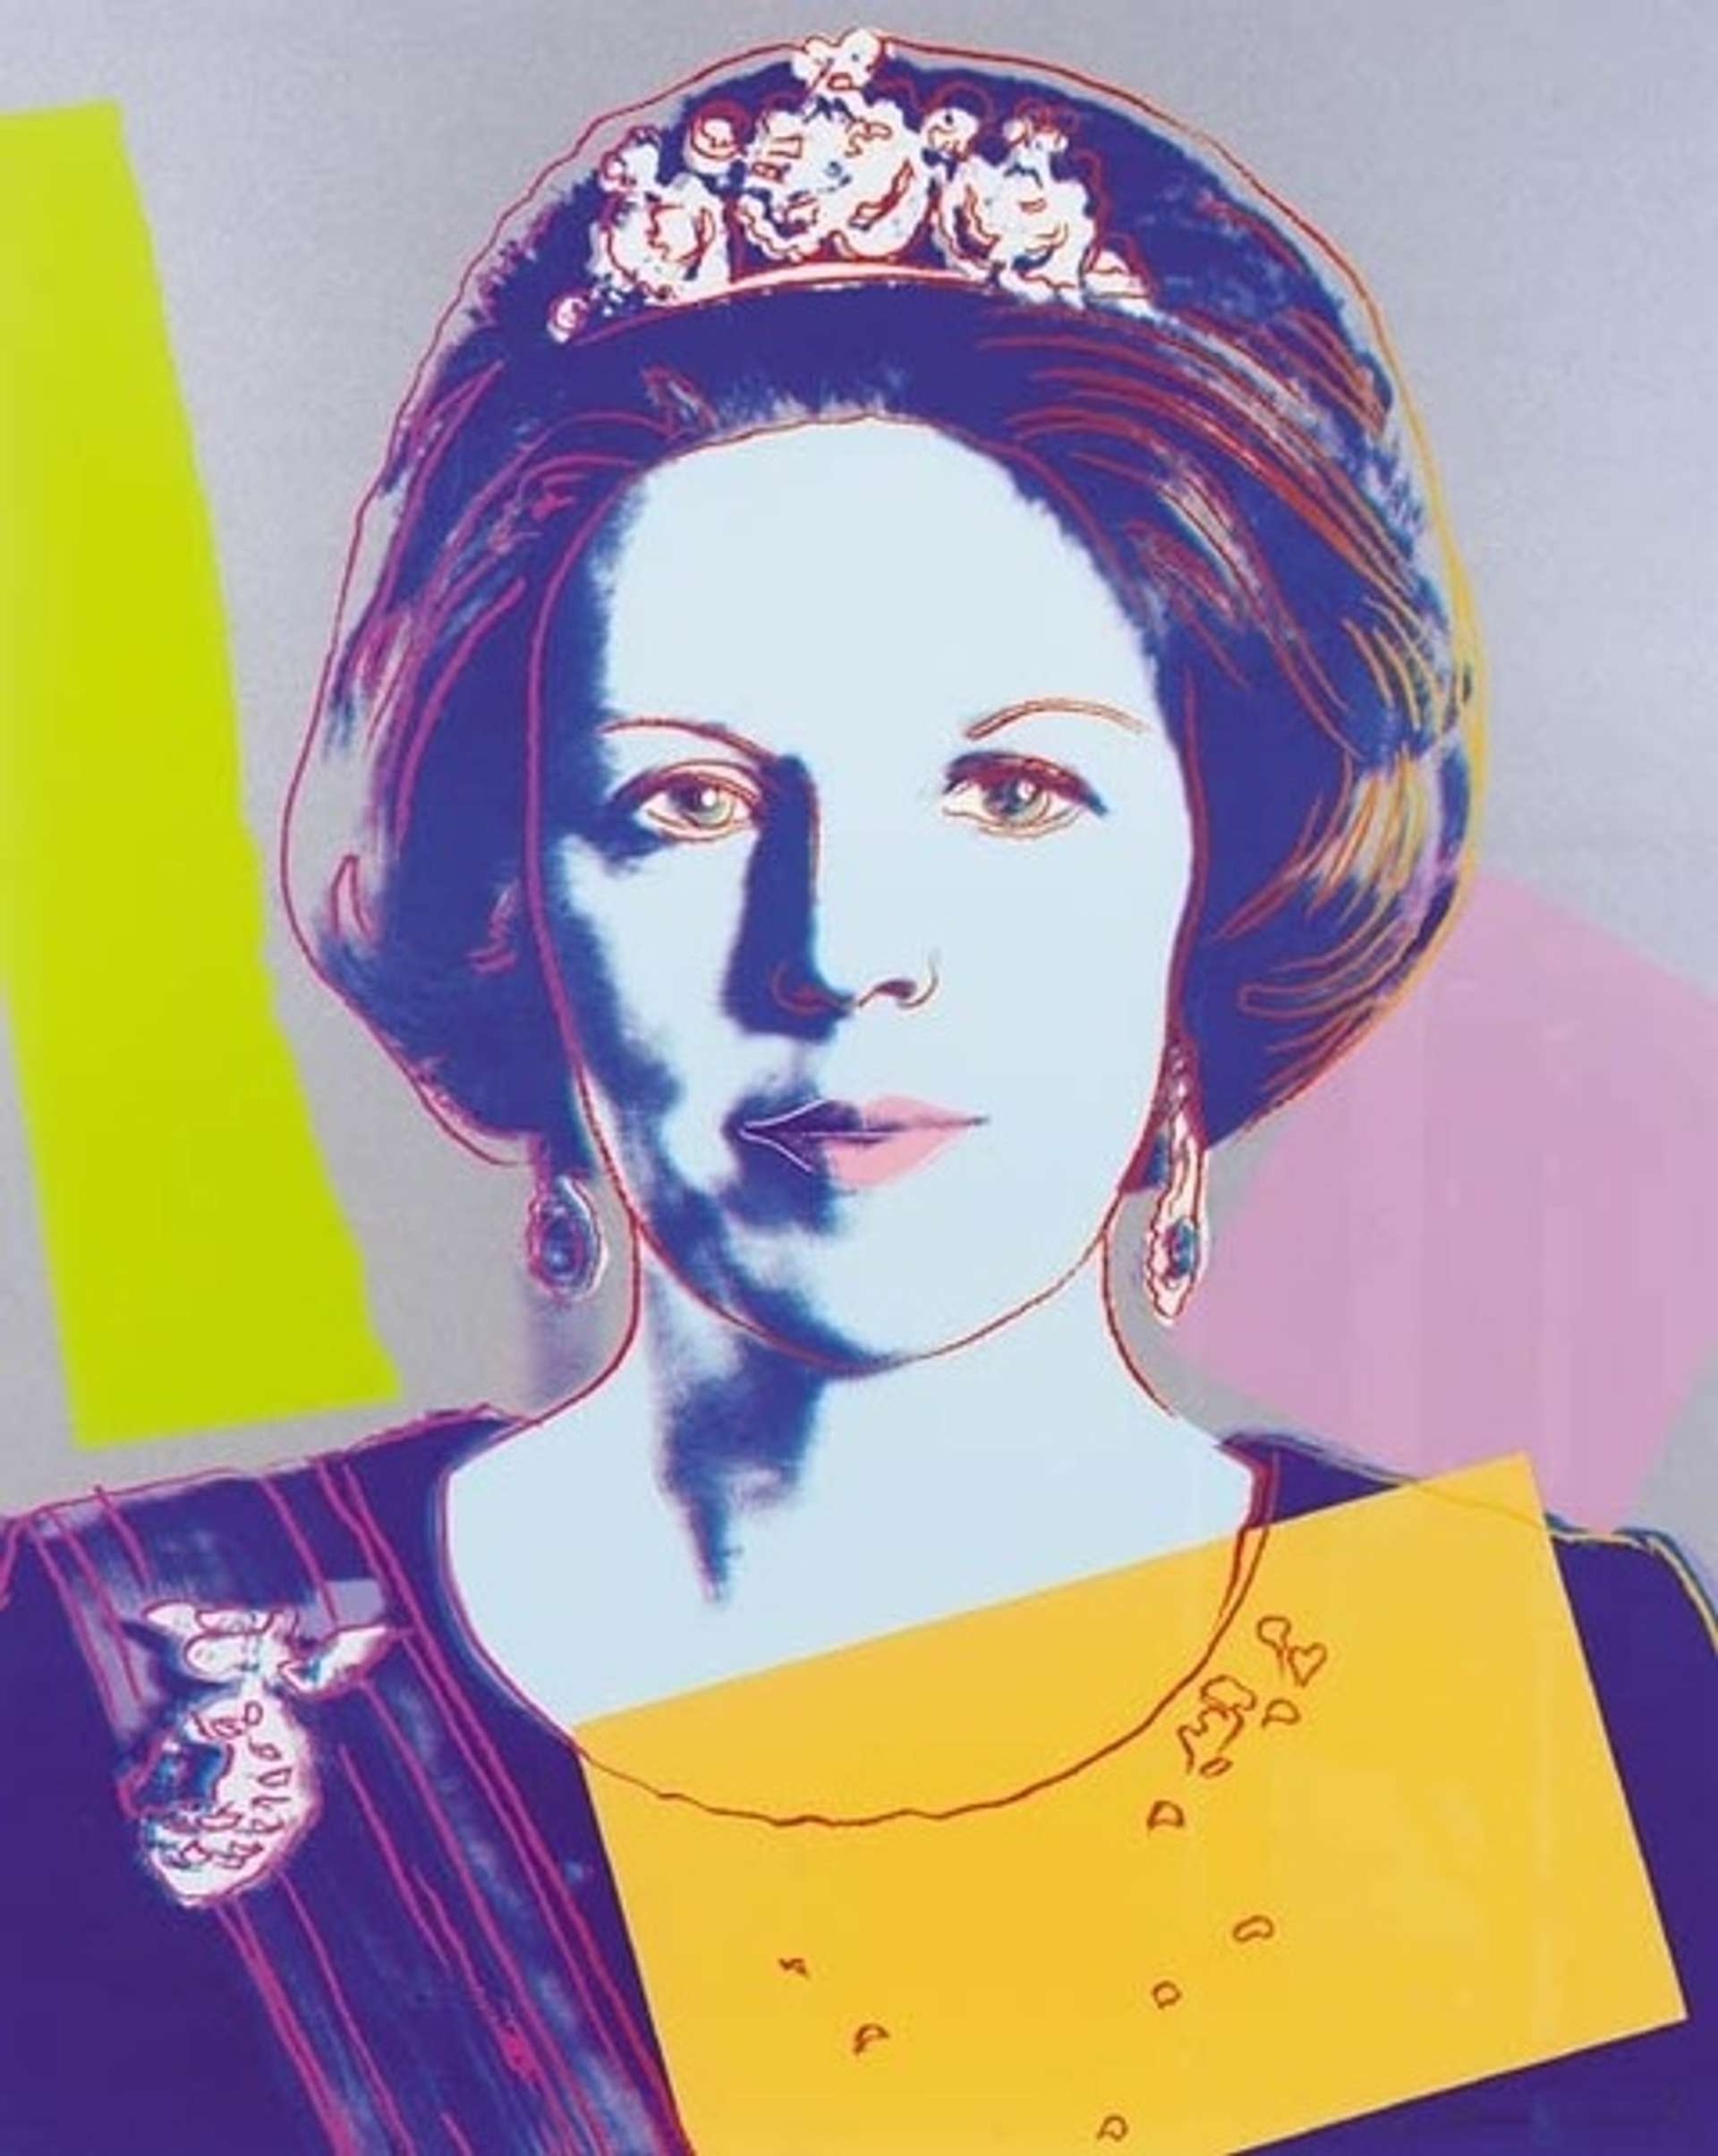 Queen Beatrix Of The Netherlands (F. & S. II.340) by Andy Warhol